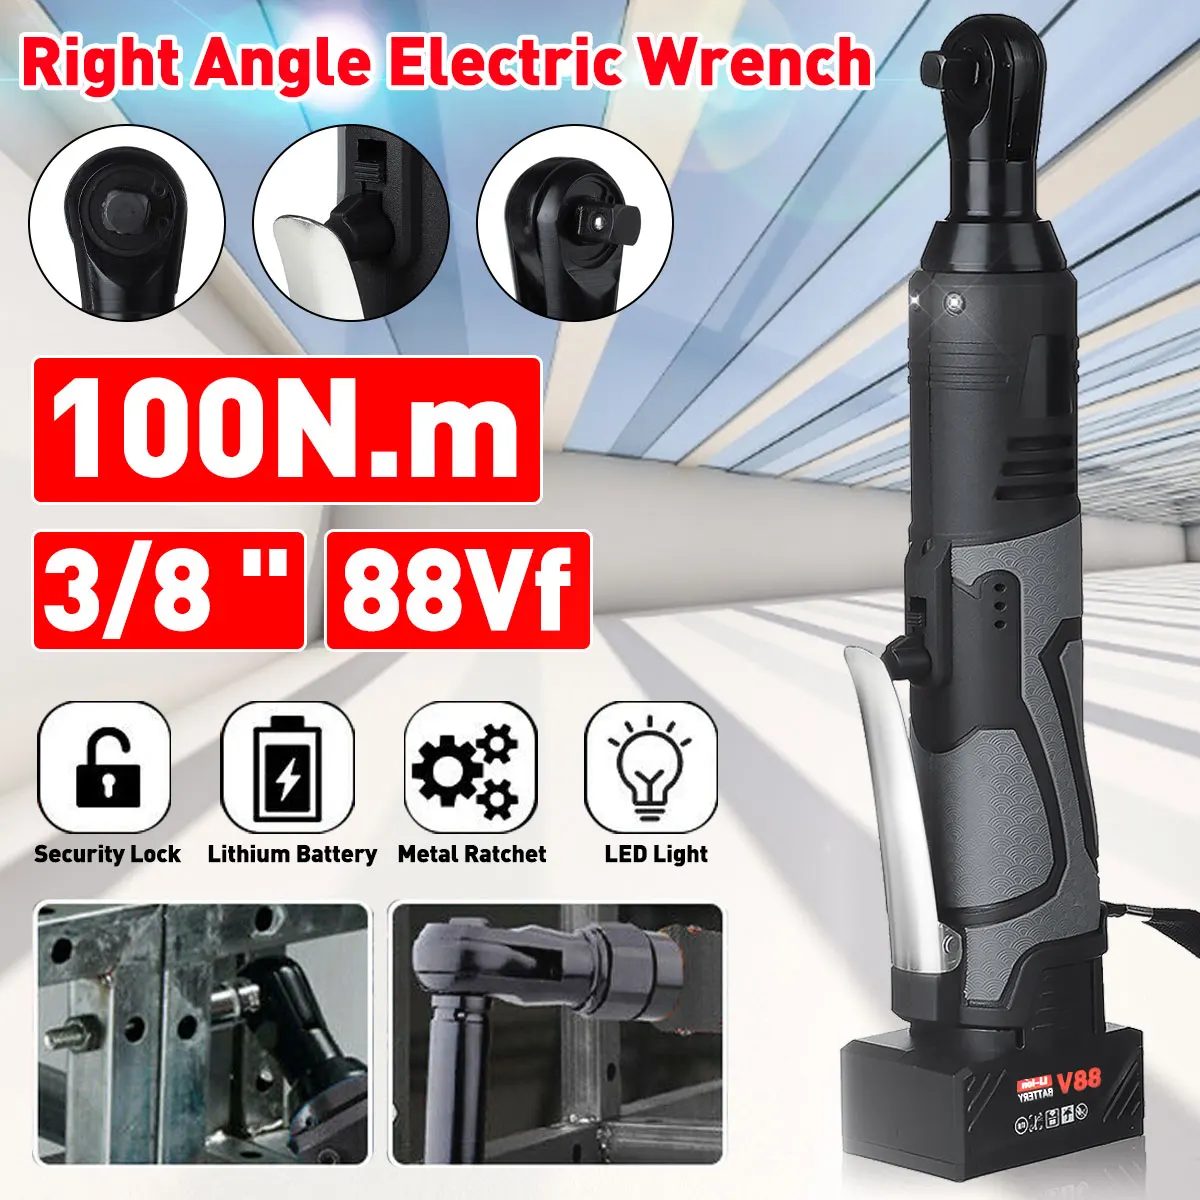 

100N.m Cordless Electric Wrench 88VF 3/8" Ratchet Right Angle Wrench with 2 Batteries 90 Degree Angle Drill Screwdriver Wrench